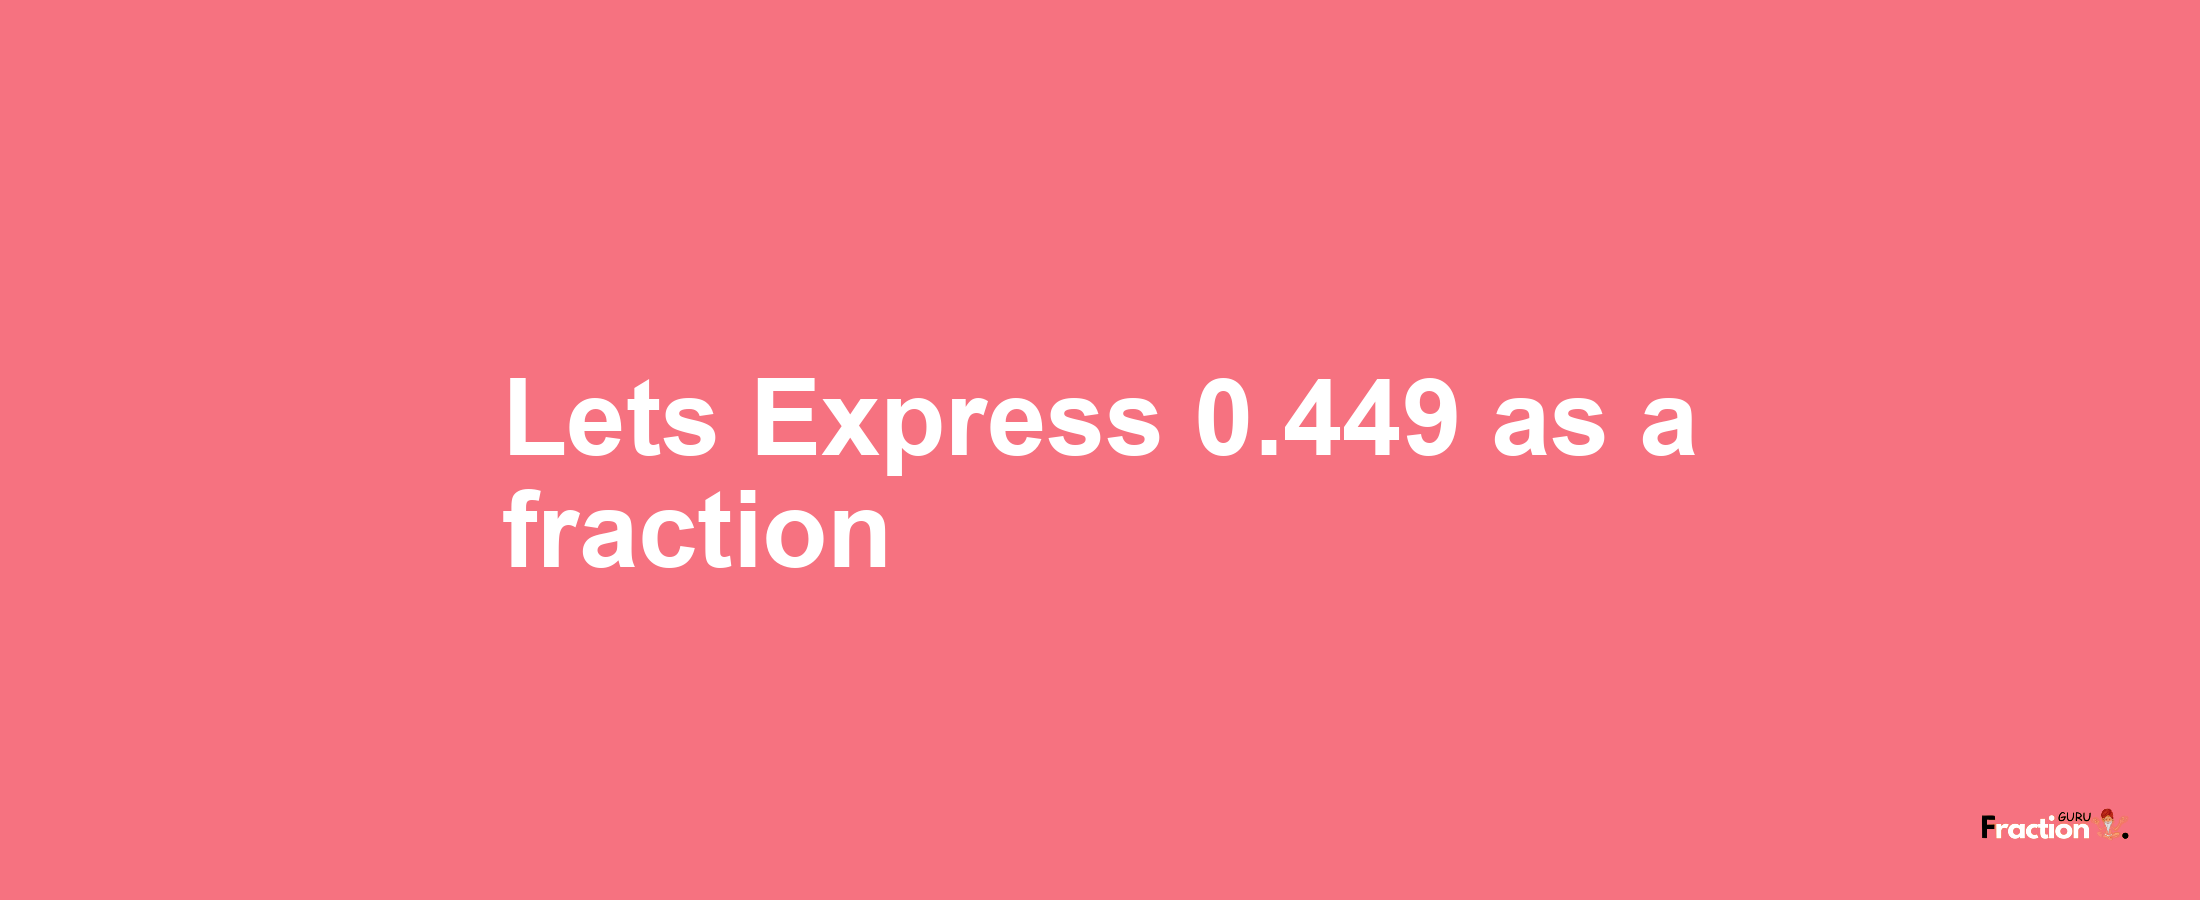 Lets Express 0.449 as afraction